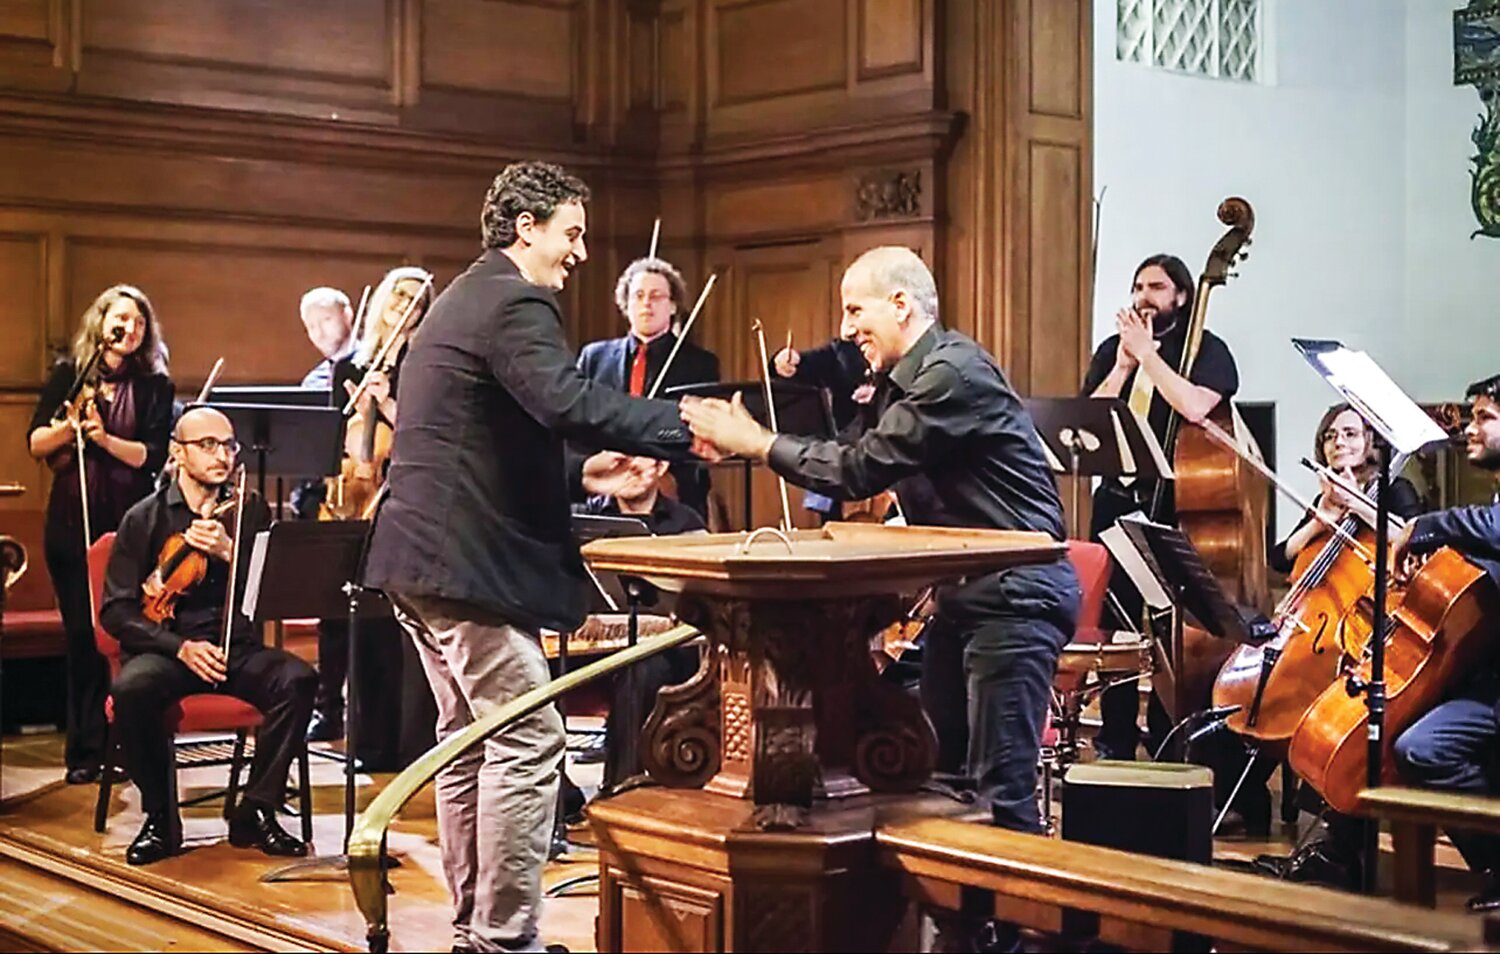 Lebanese composer Serge El Helou and performing artist and educator Hafez Kotain greet each other.